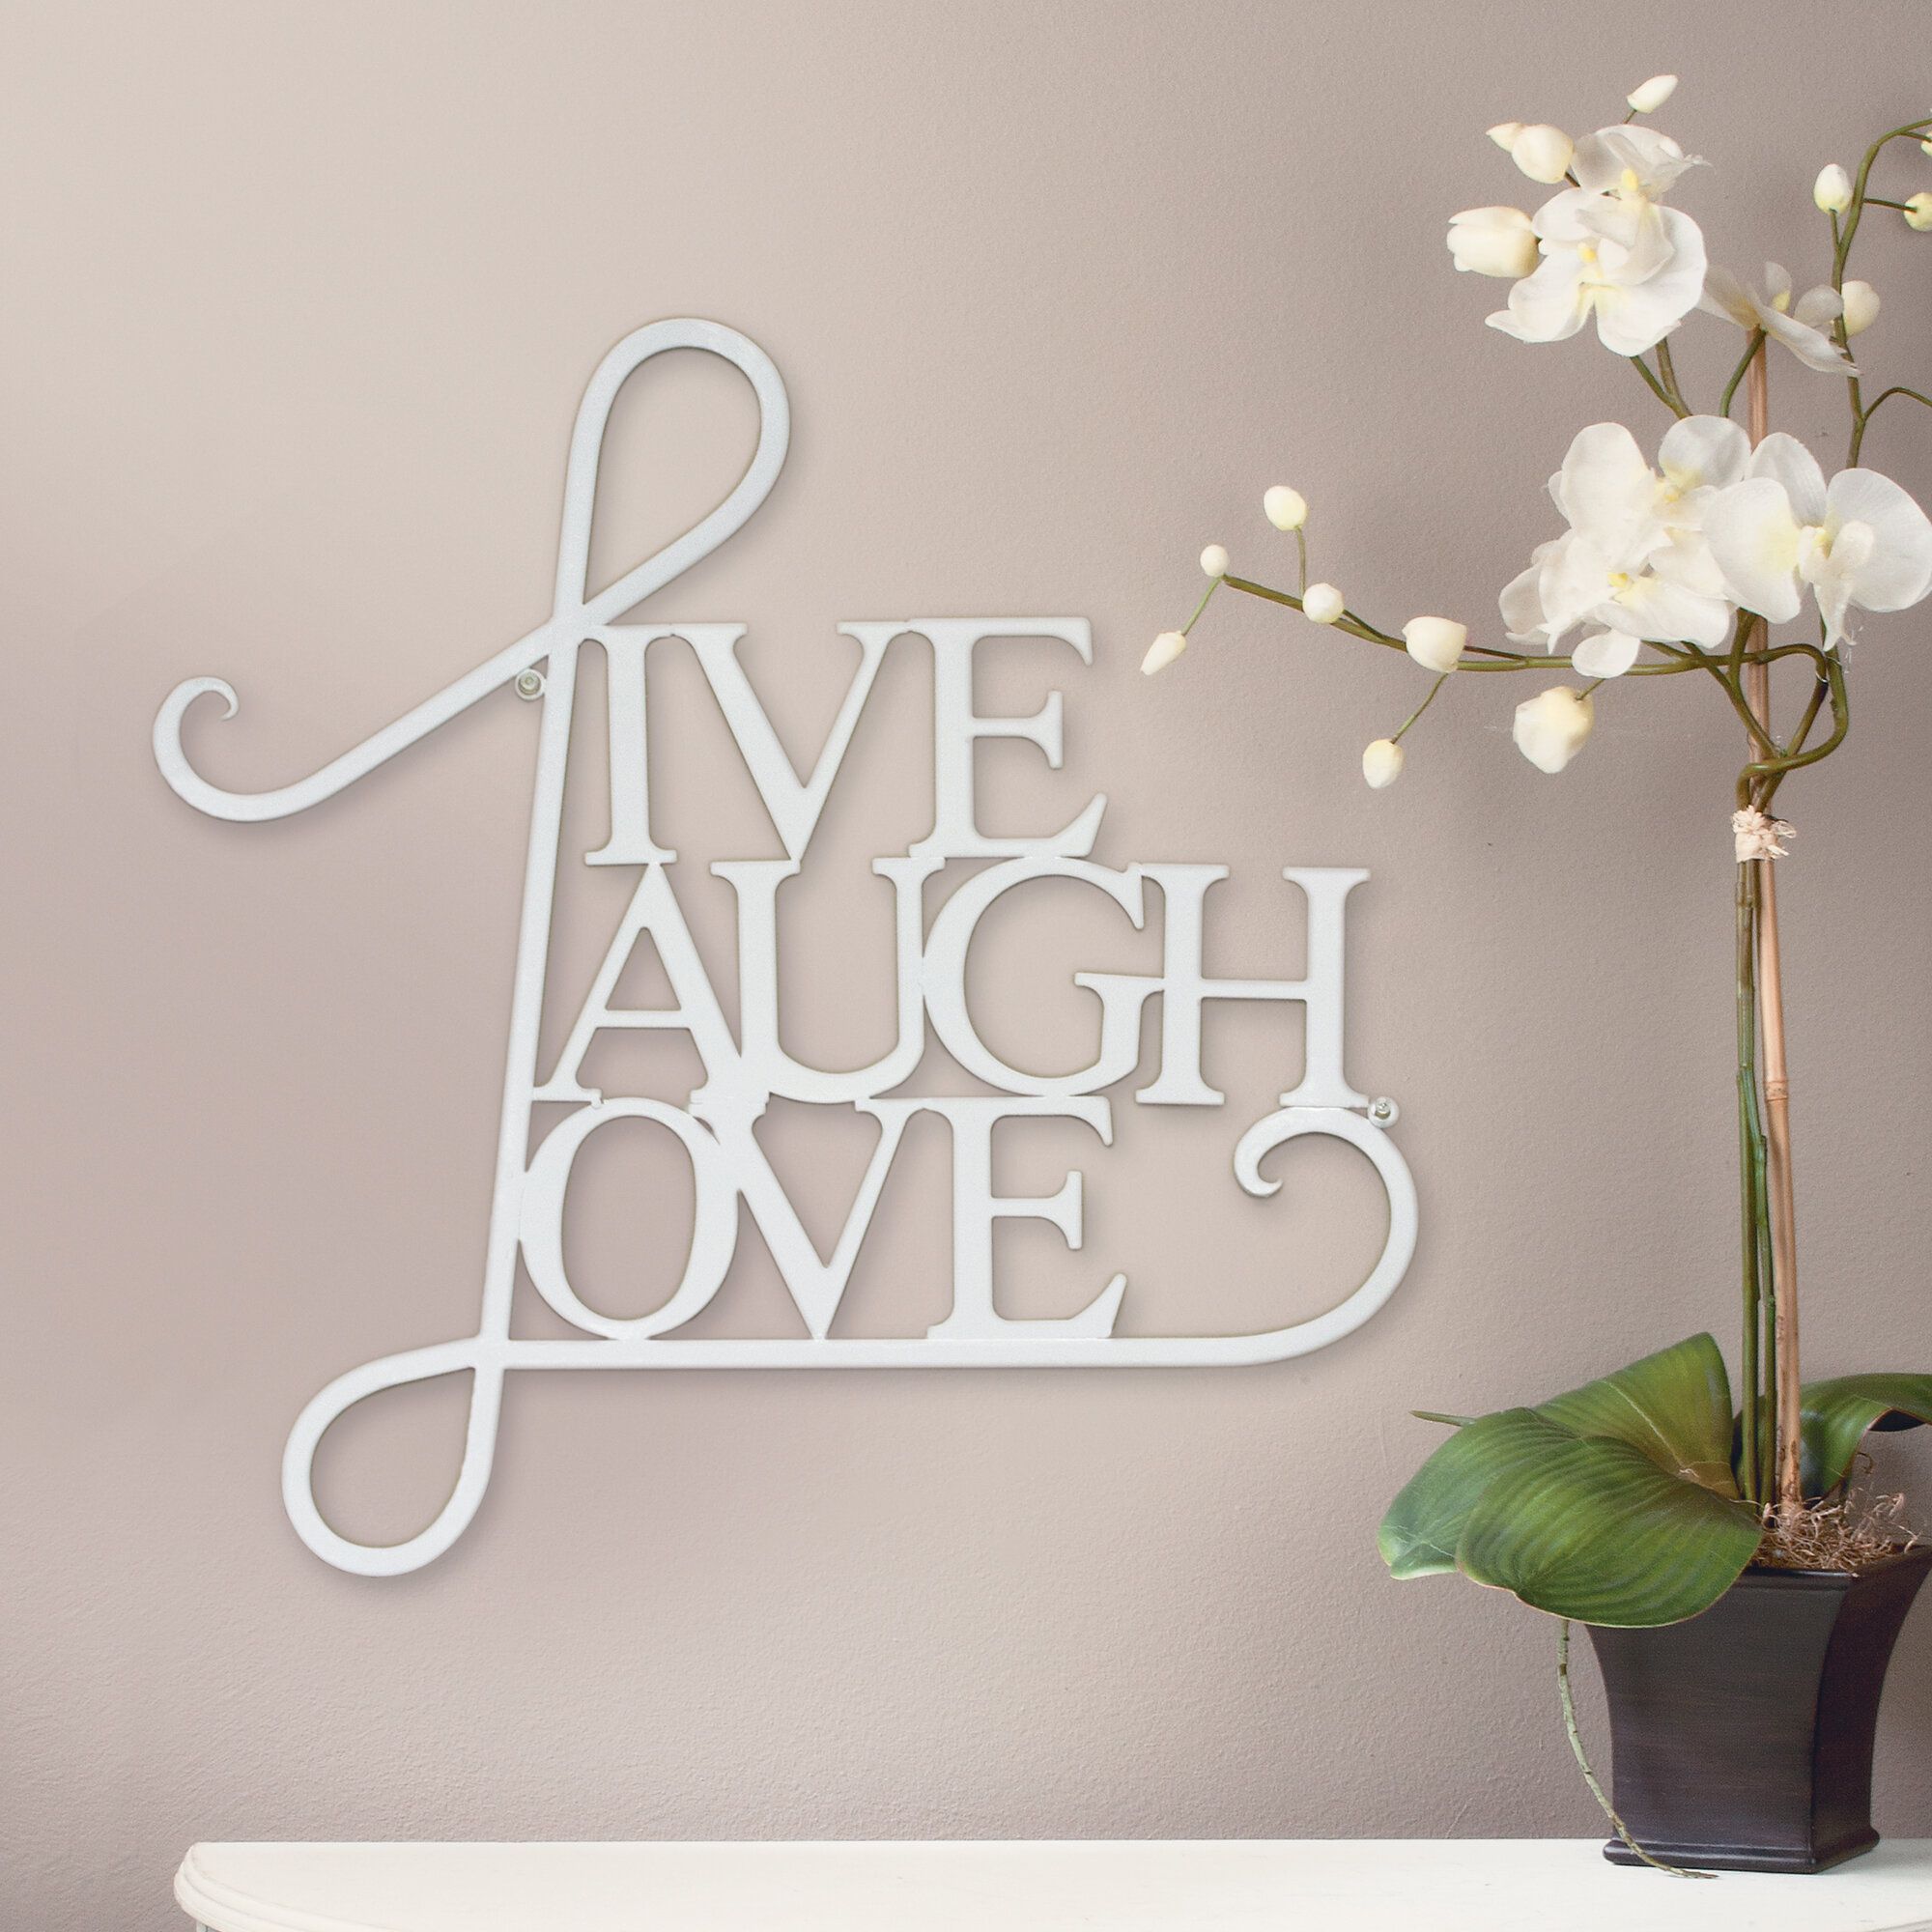 White Antler Wall Decor | Wayfair In Live, Laugh, Love Antique Copper Wall Decor (Photo 7 of 30)